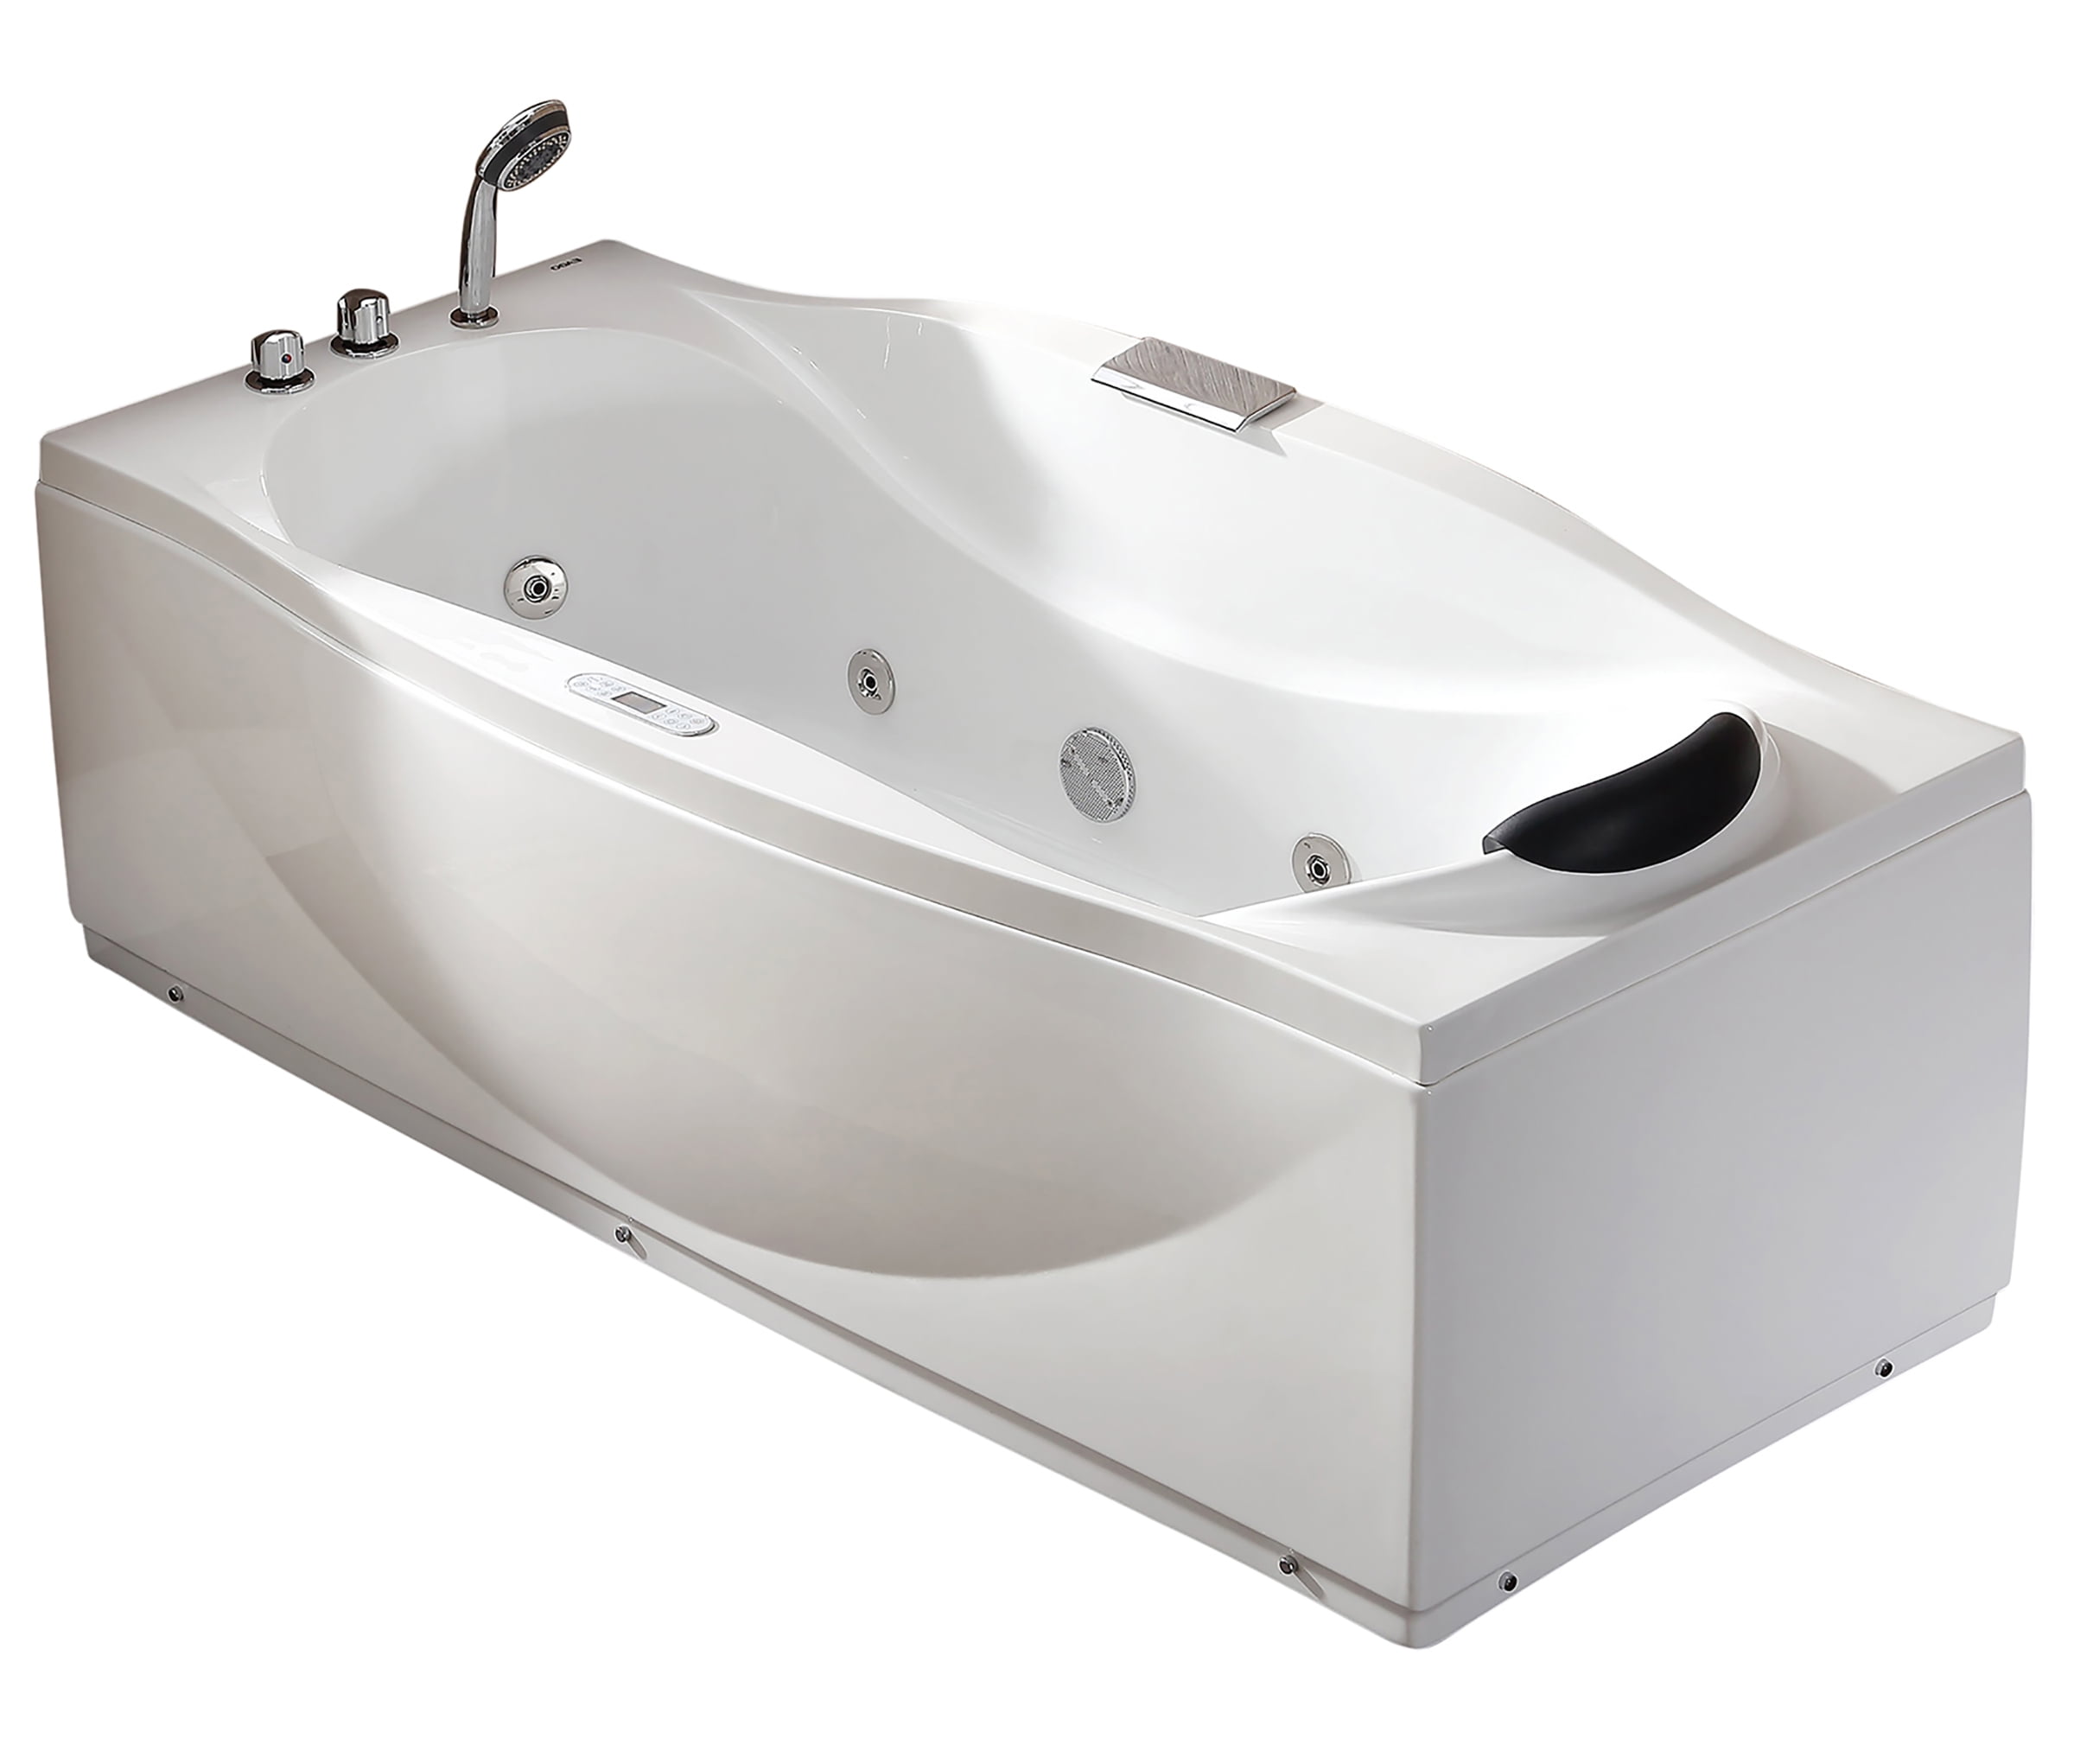 Picture of Eago AM189ETL-L 6 ft. Left Drain Acrylic White Whirlpool Bathtub with Fixtures